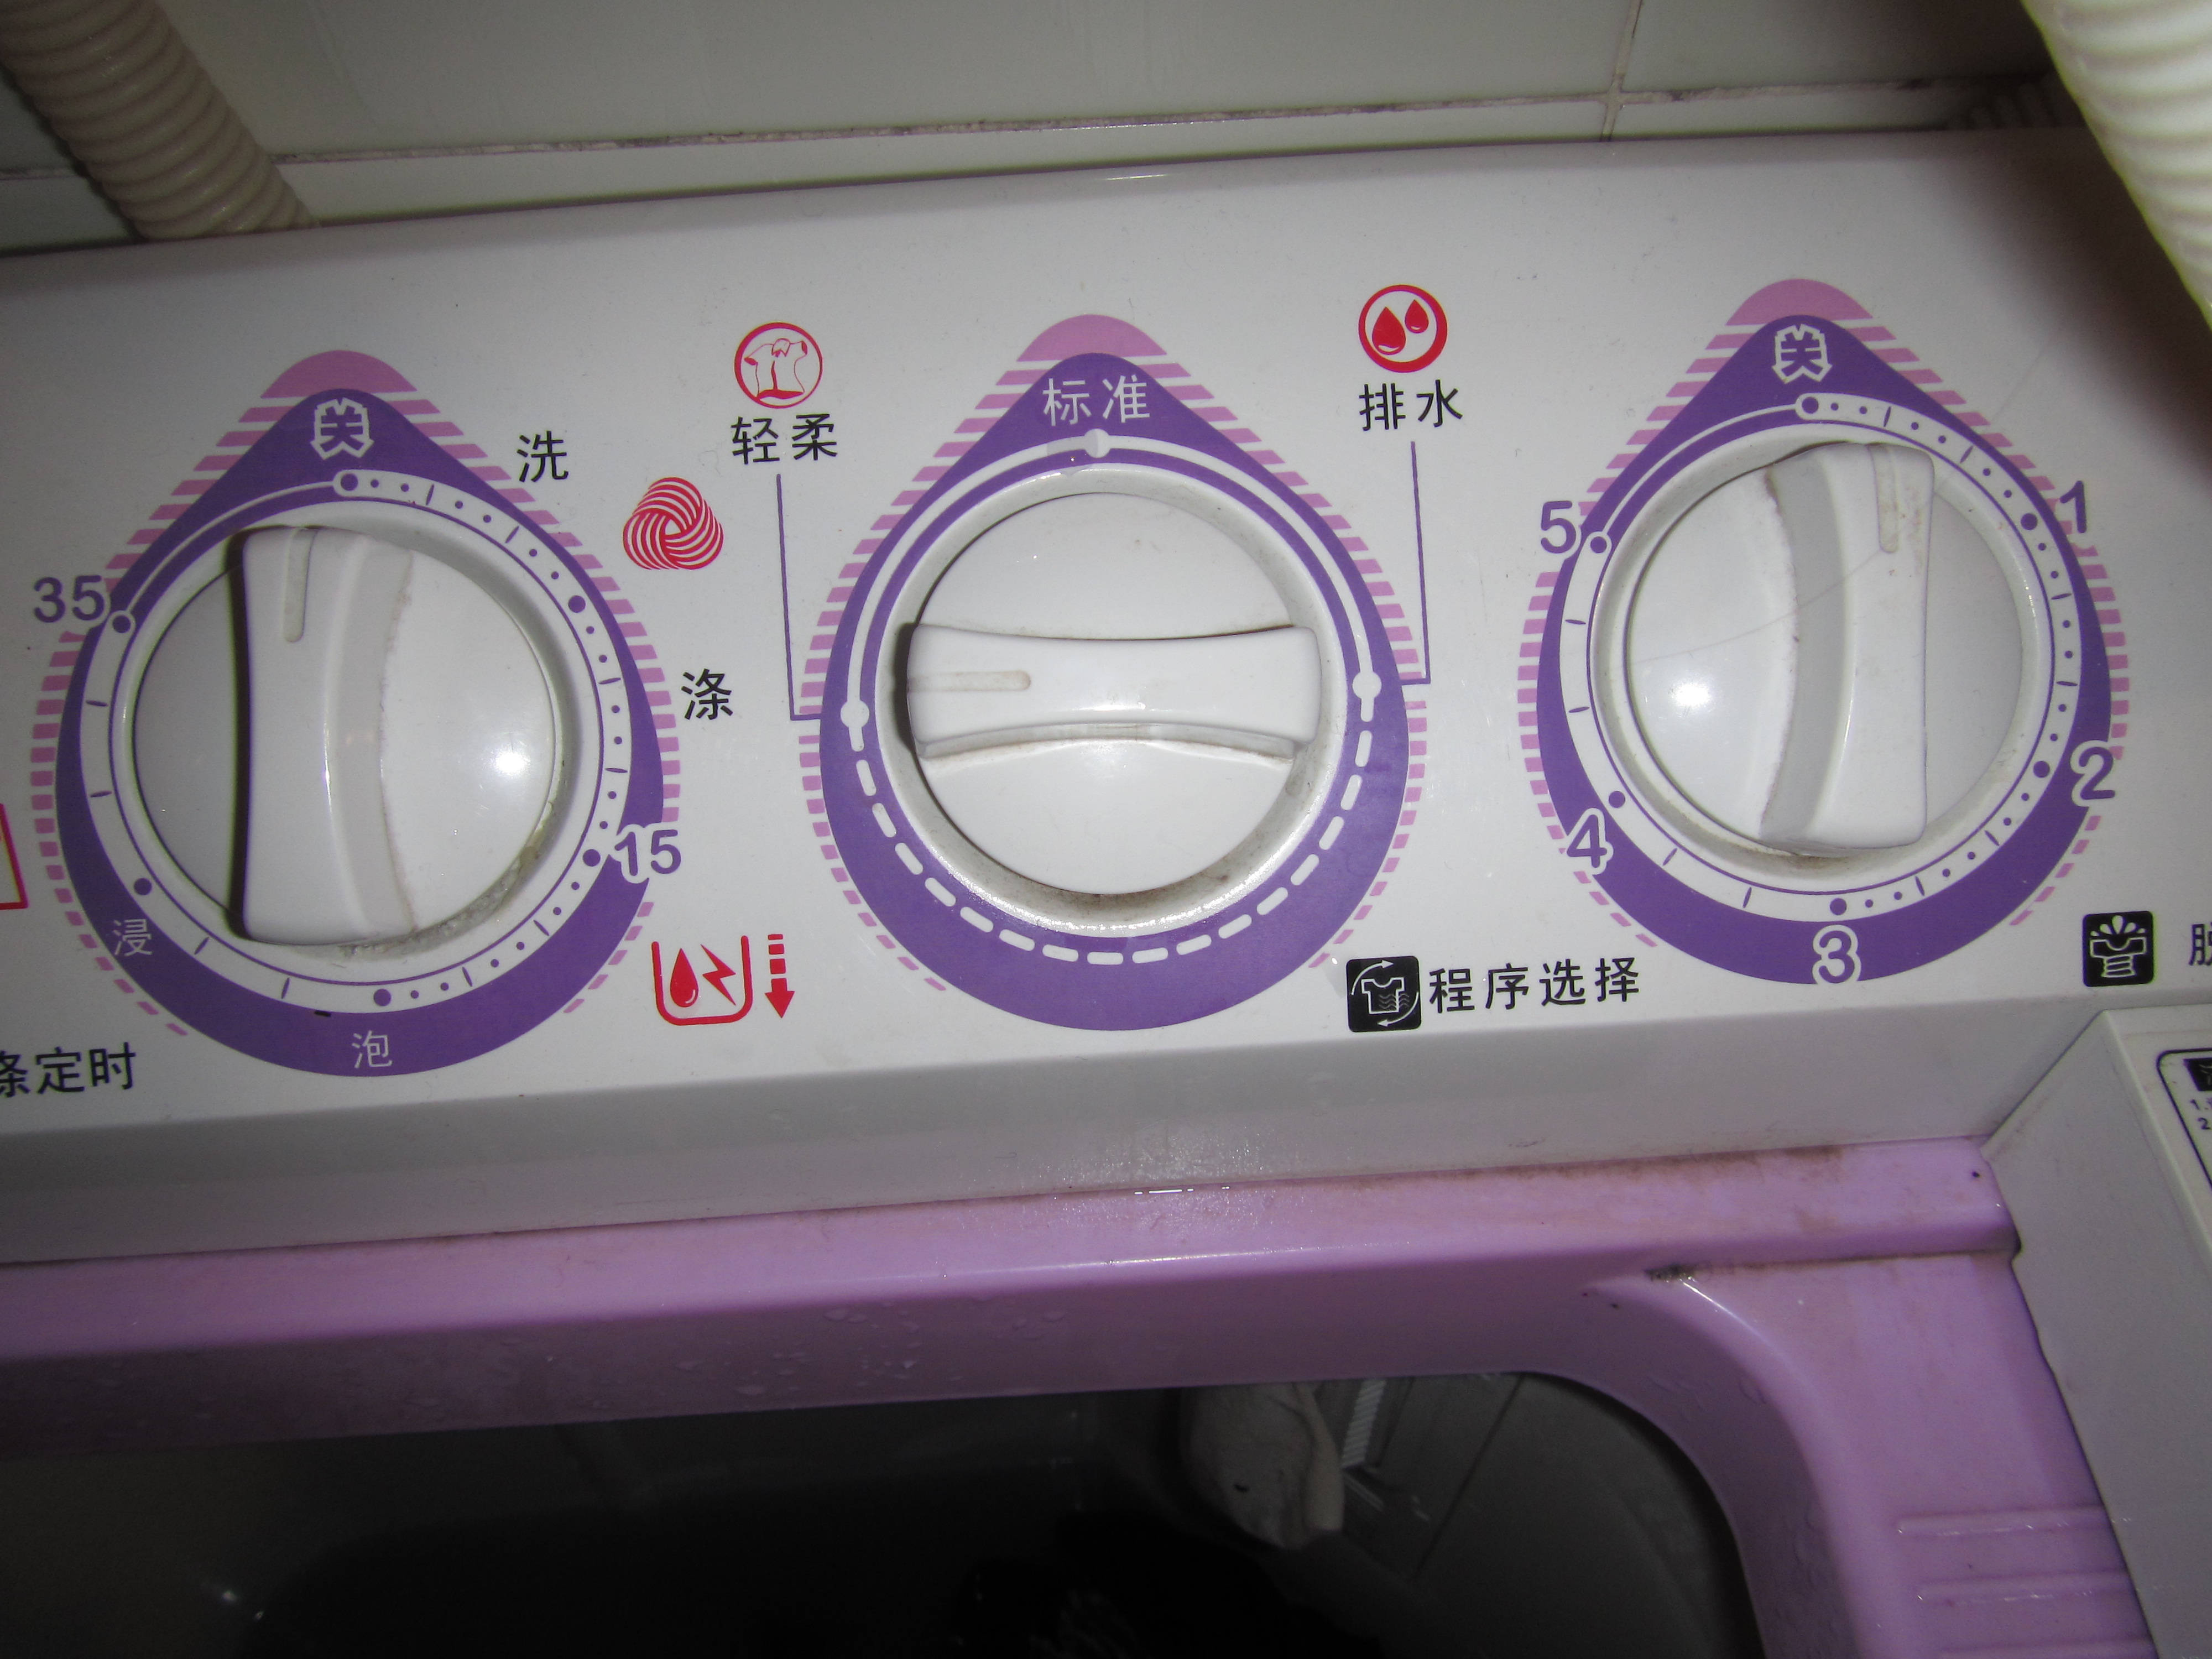 In our defense, everything is in Chinese, so we didn't know that the middle dial needed to be turned all the way to the left for the machine to work...